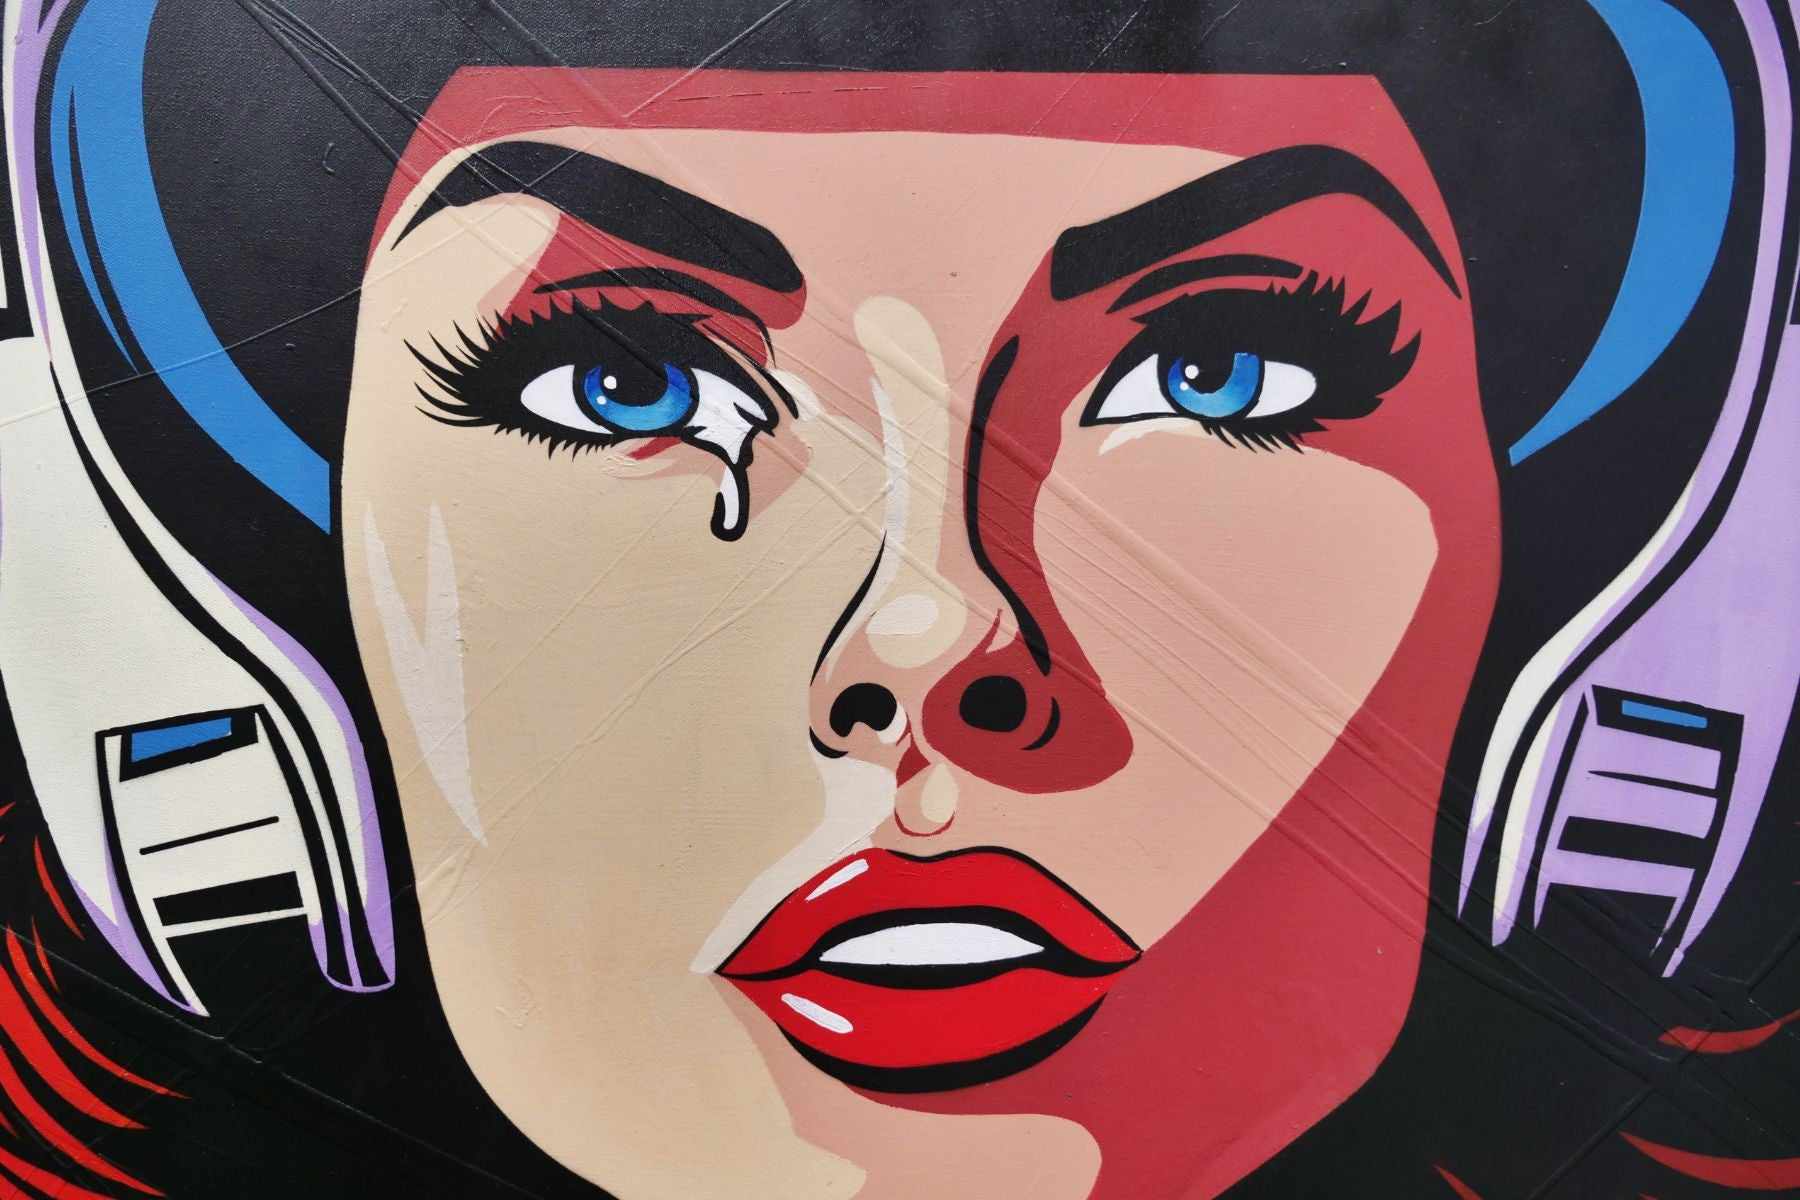 At That Very Moment 190cm x 100cm Space Comic Woman Textured Urban Pop Art Painting (SOLD)